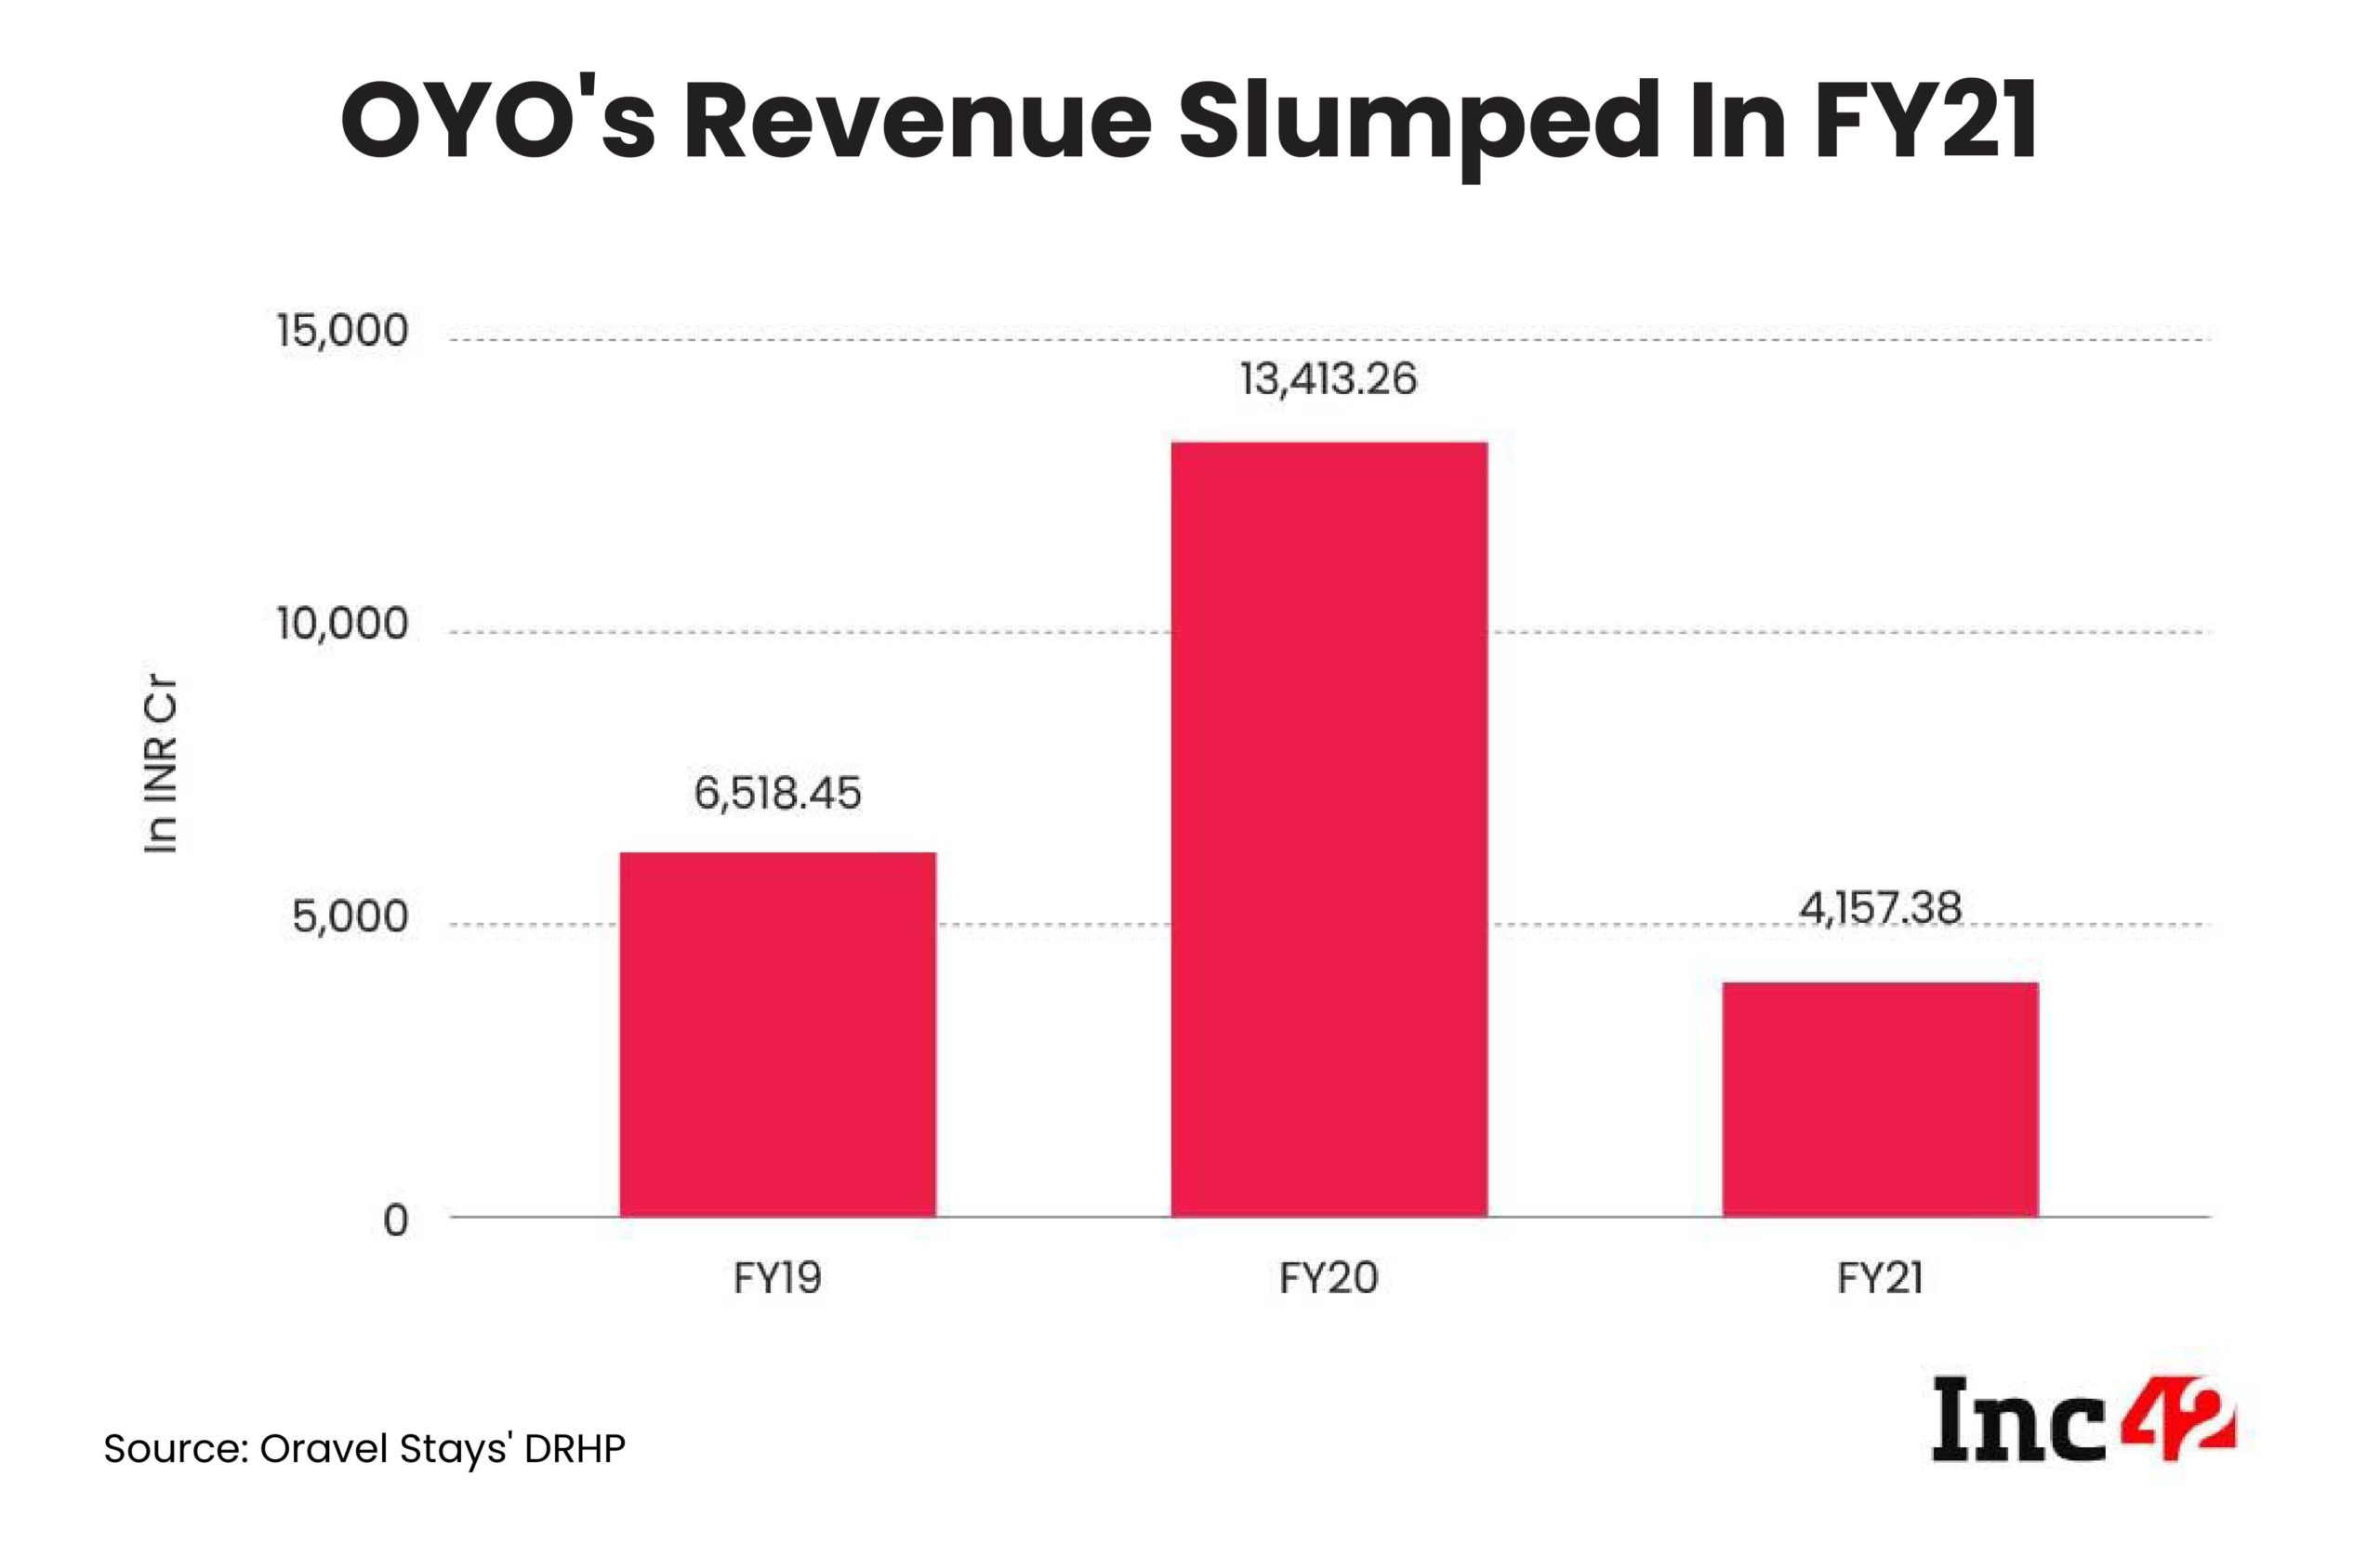 Charts That Track The Business Health Of IPO-Bound OYO